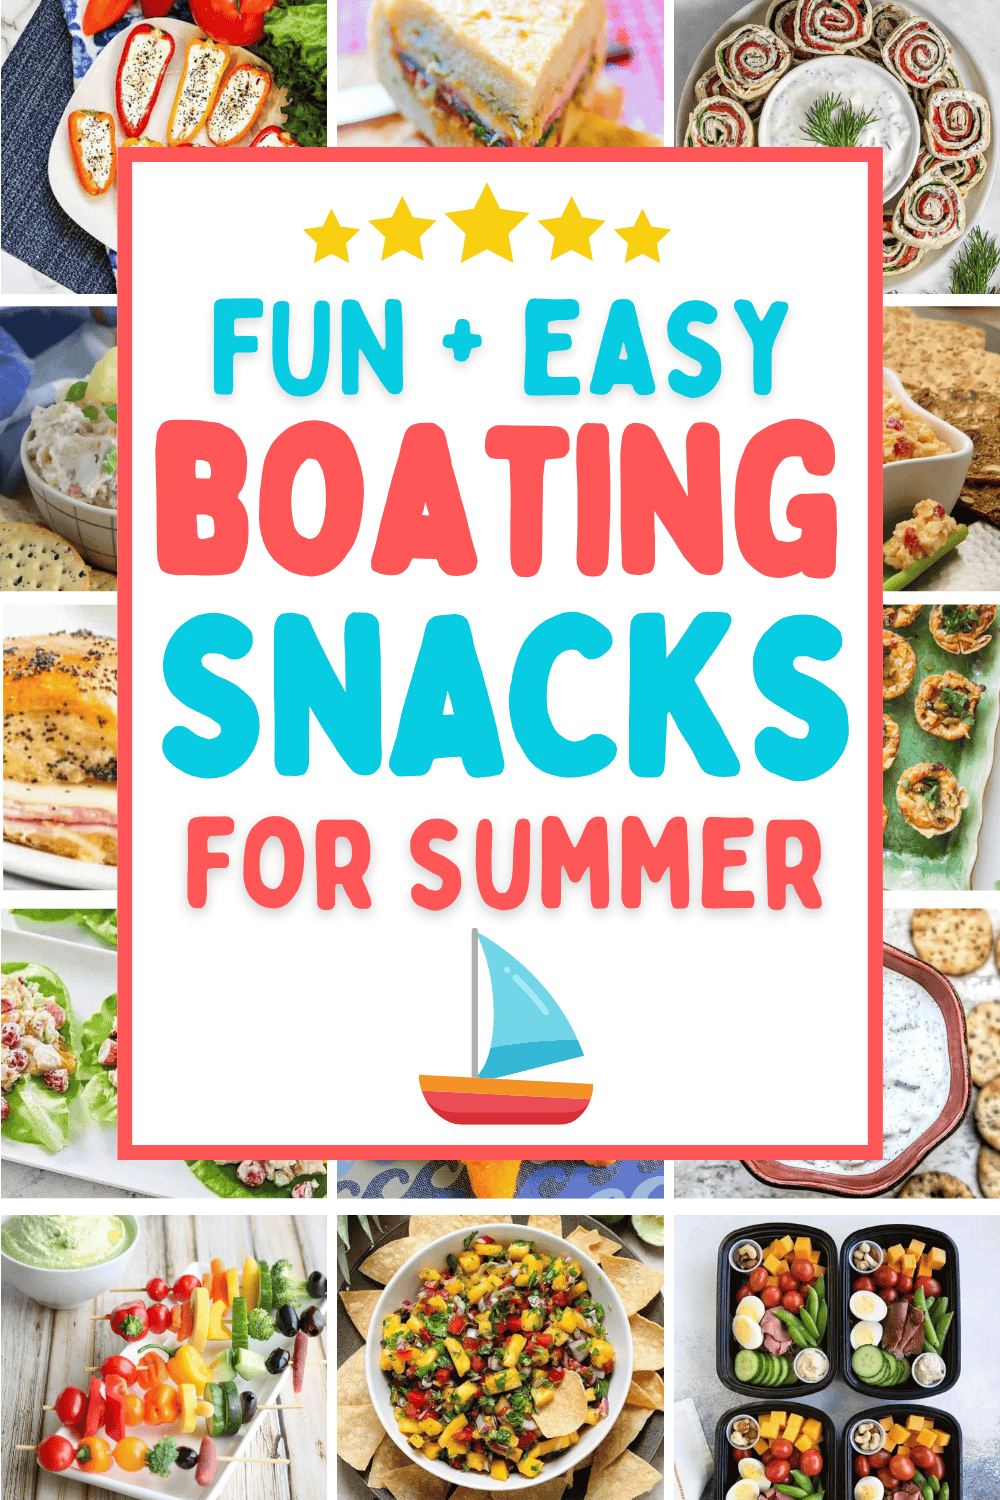 Easy boating food ideas! Fun boat snacks, easy boat meals and the best food to take on the boat. Boat snacks ideas summer, easy boat food ideas, snacks for boating, boating snacks, lake snacks, boating food ideas summer, beach snacks for adults, beach day food, vacation snacks, float trip food, pool snacks, lake house food ideas, easy picnic food, beach snacks ideas families, food for boating day, lunch ideas for the boat, dinner on the boat ideas, good food for boating, boat snacks for adults.